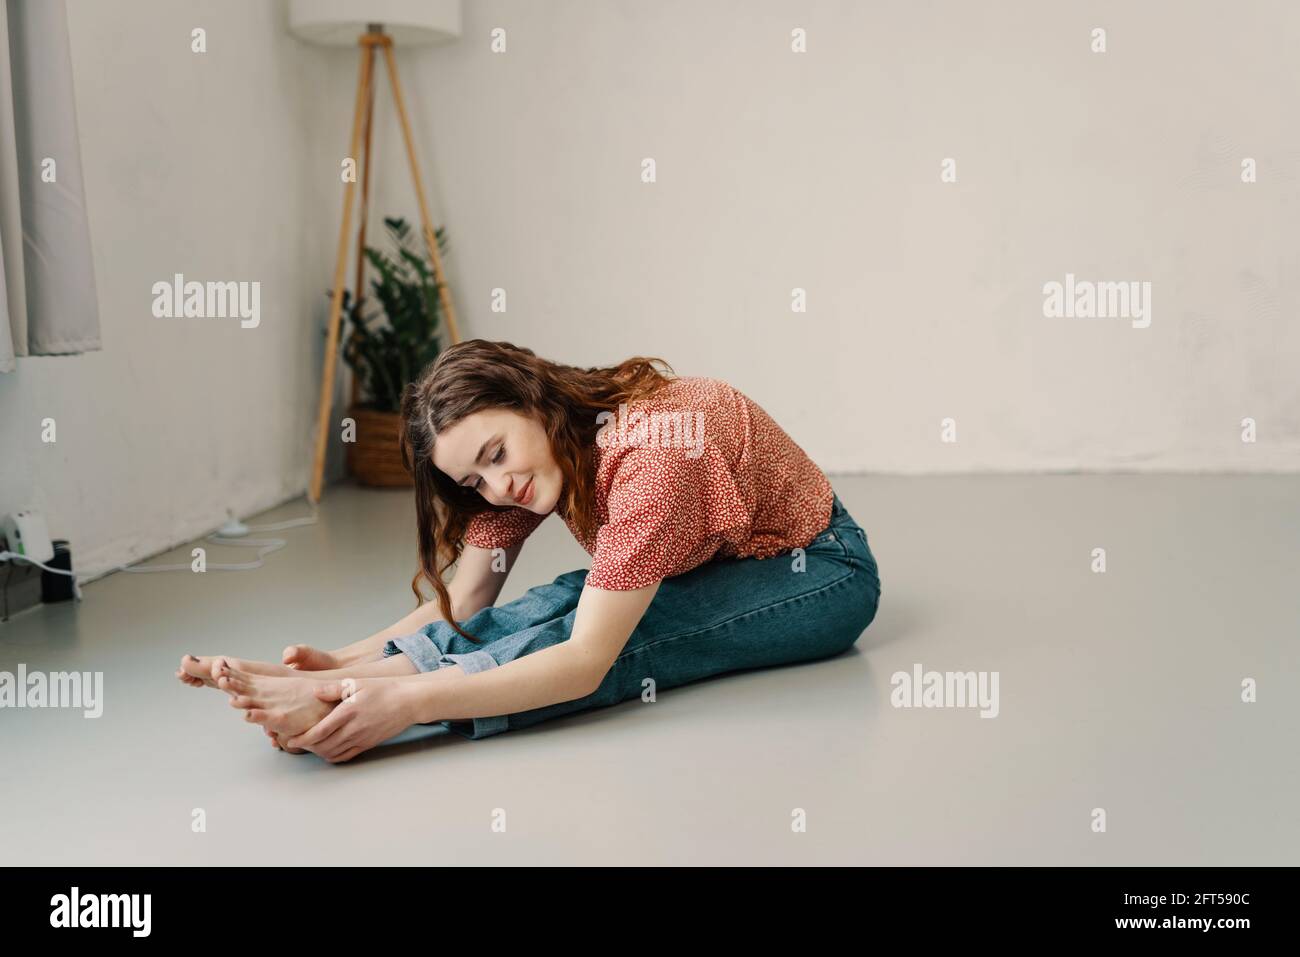 Supple flexible young woman doing toe stretches on the floor as she performs her daily workout to tone and strengthen her muscles in a health and fitn Stock Photo